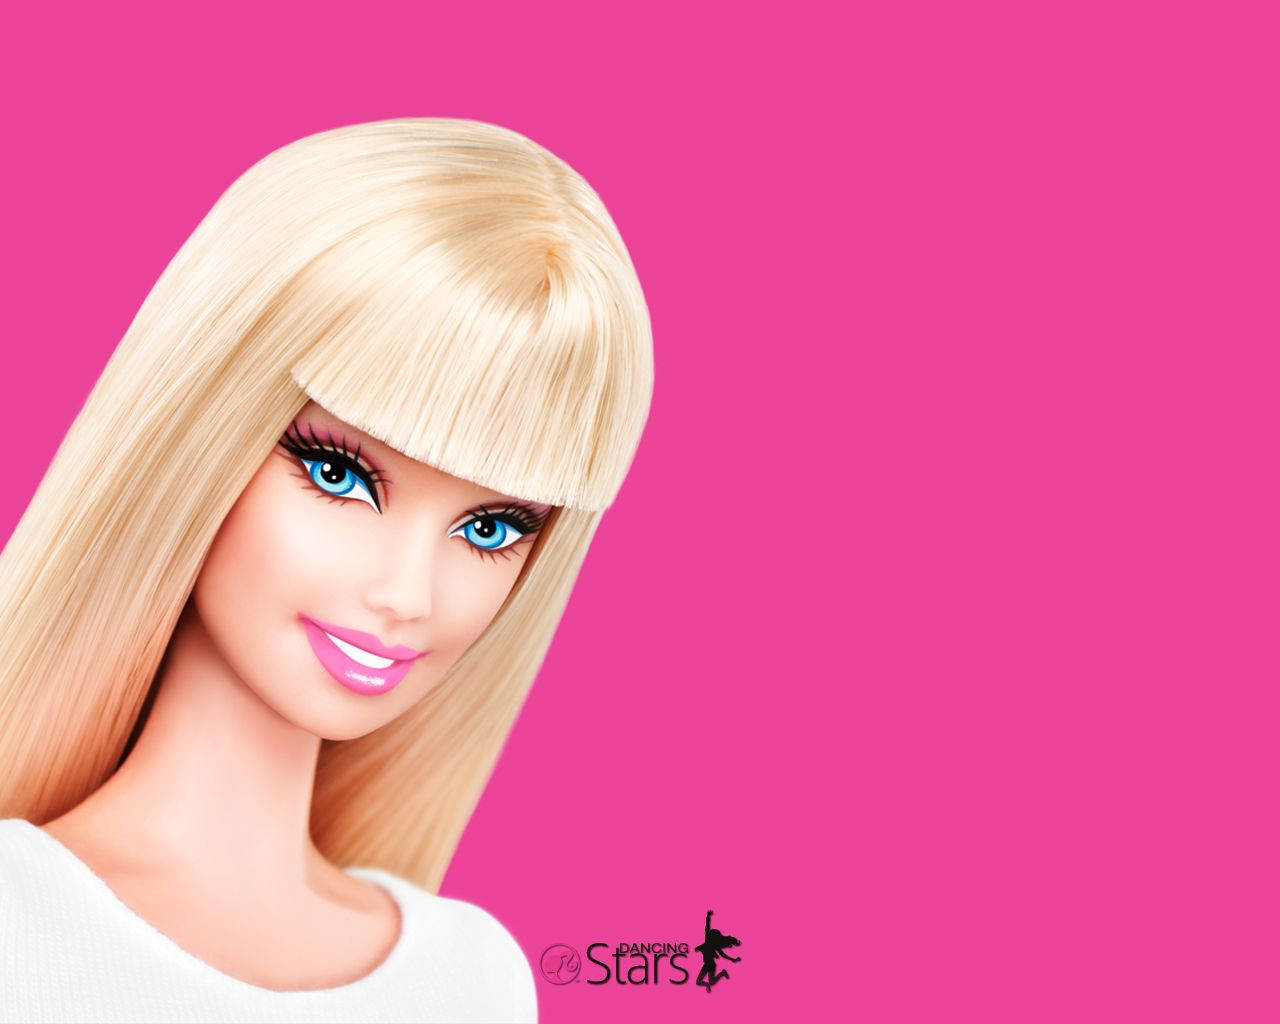 Barbie Is Rocking a Chic Blonde Look Wallpaper